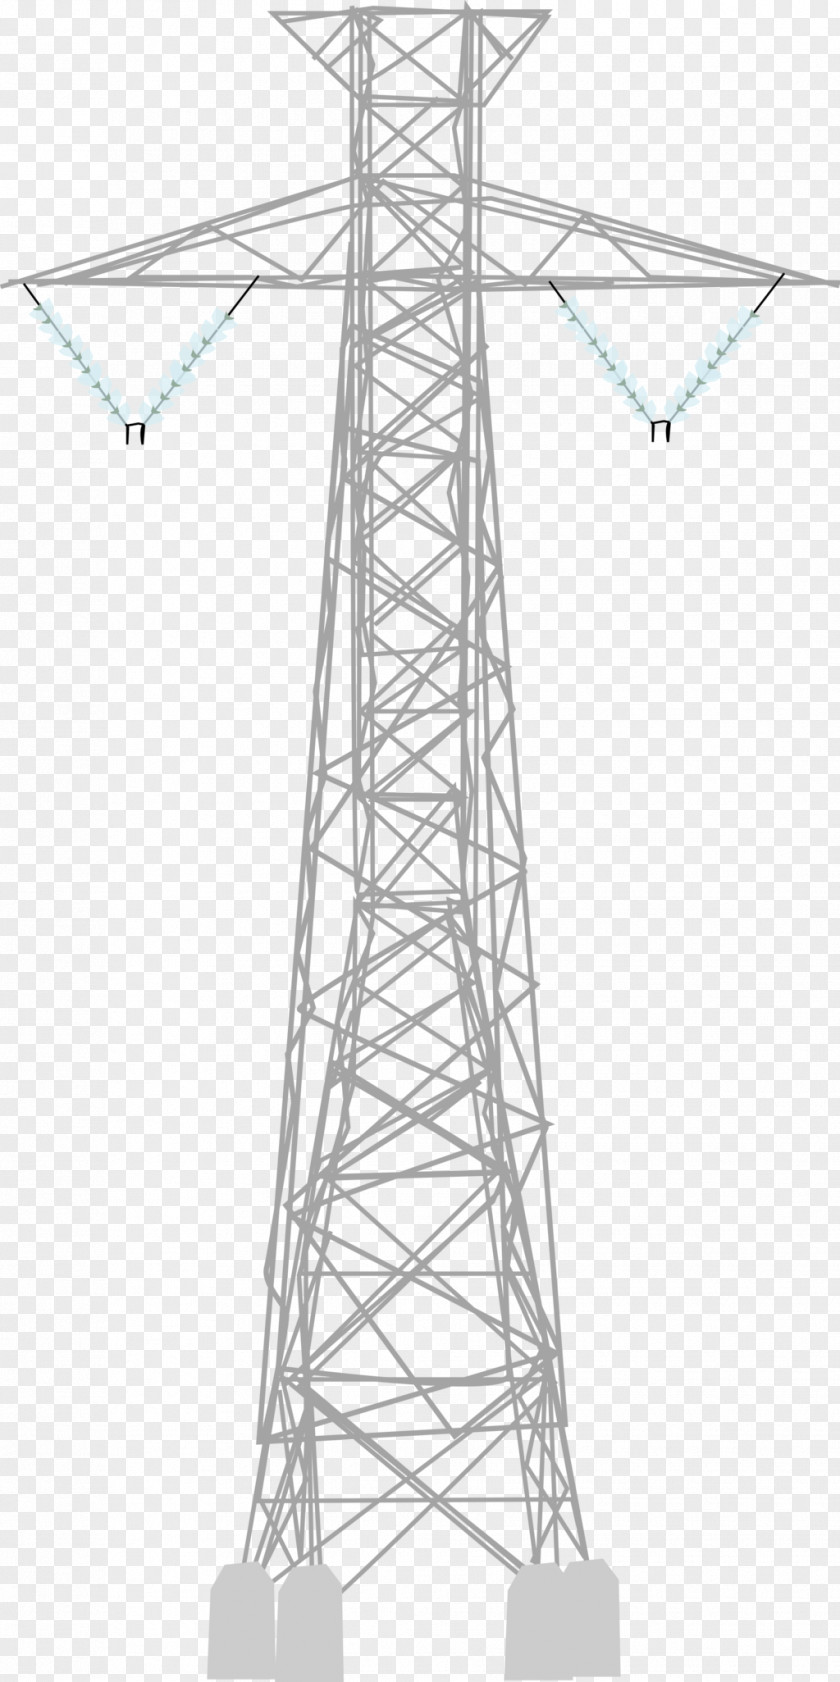 High Voltage Electricity Overhead Power Line Transmission Tower Public Utility PNG